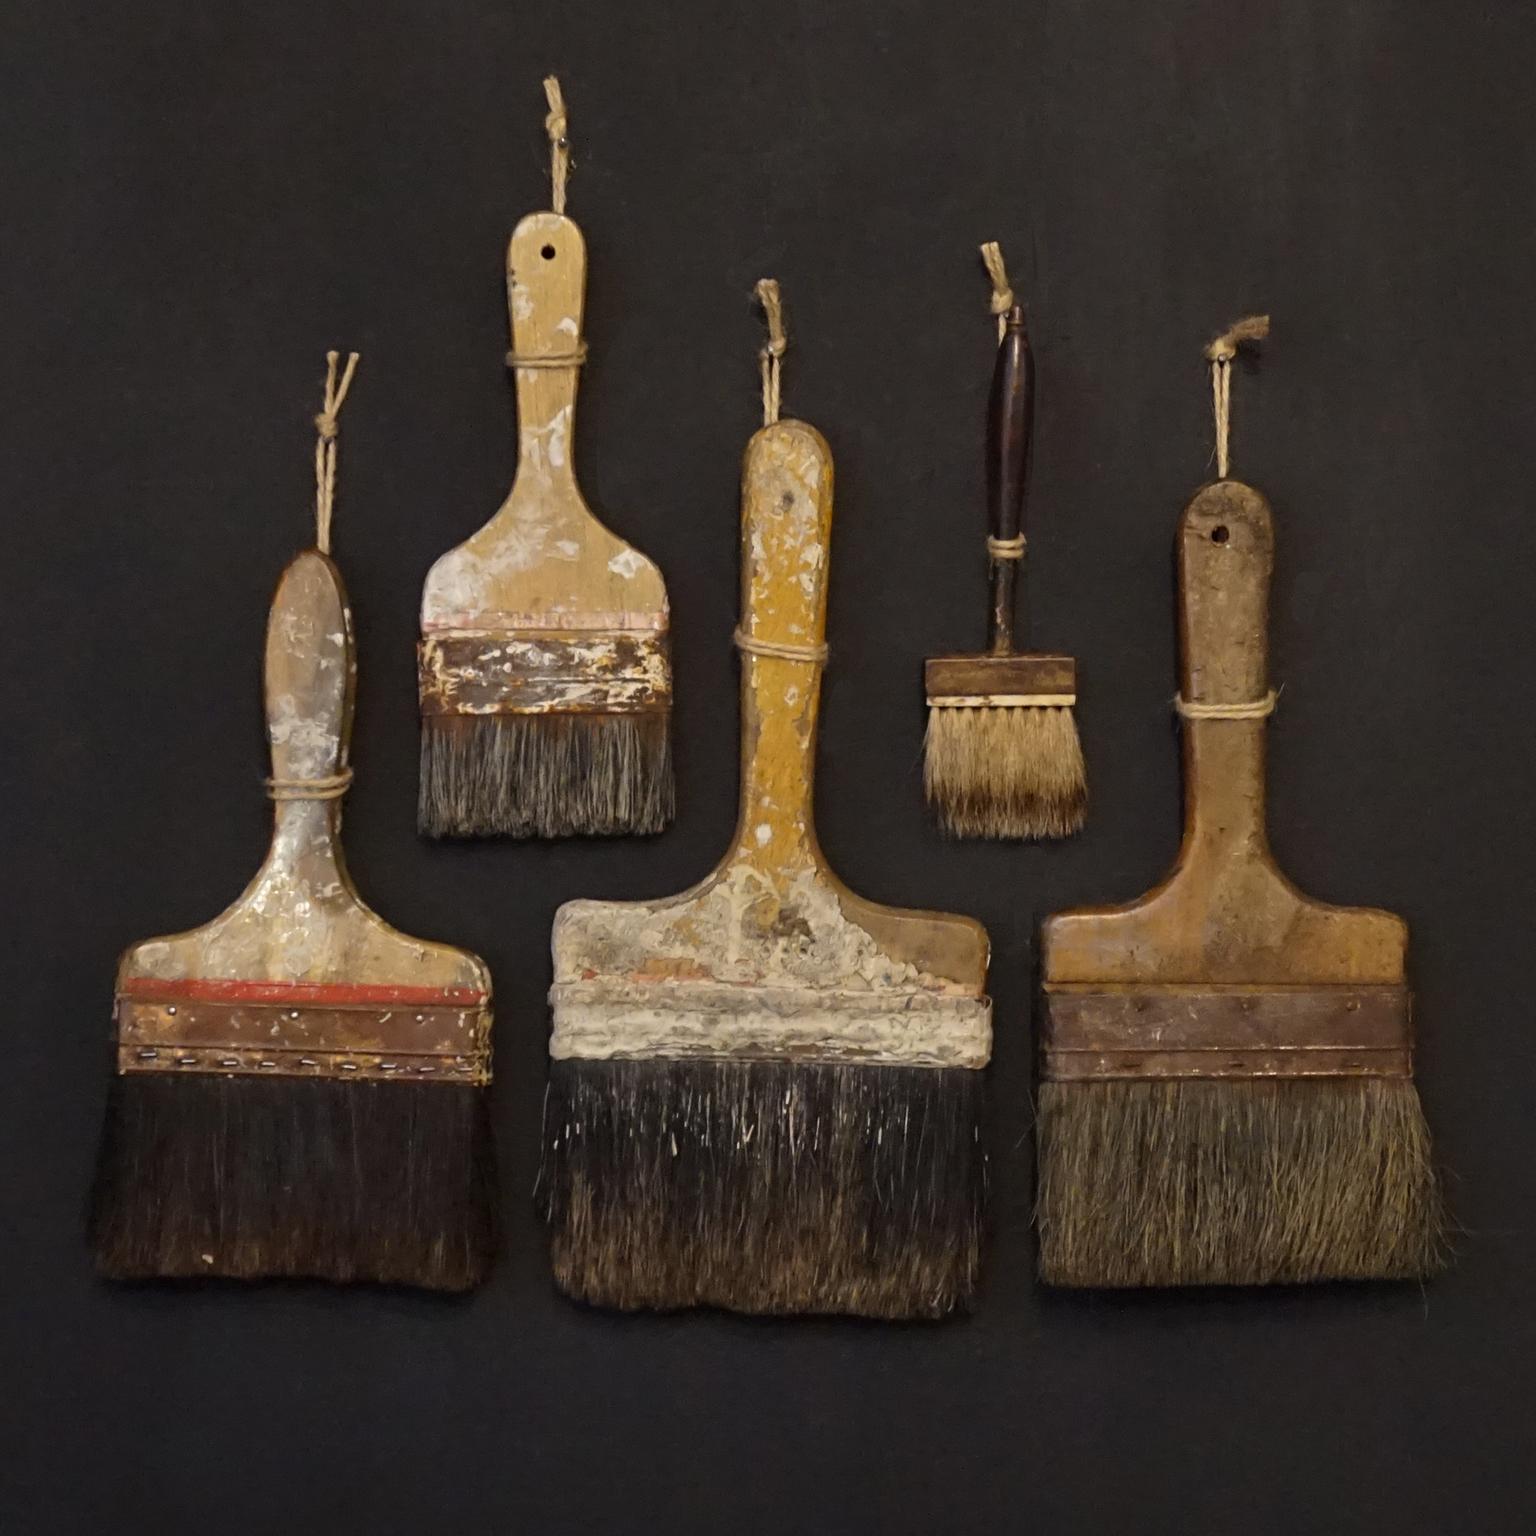 Decorative set consisting of five antique or almost antique horse hair and badger hair paint brushes. This is the real deal, each of these craftsmanship handmade pure bristle brush is an art piece on its own because you can see they where used.
The